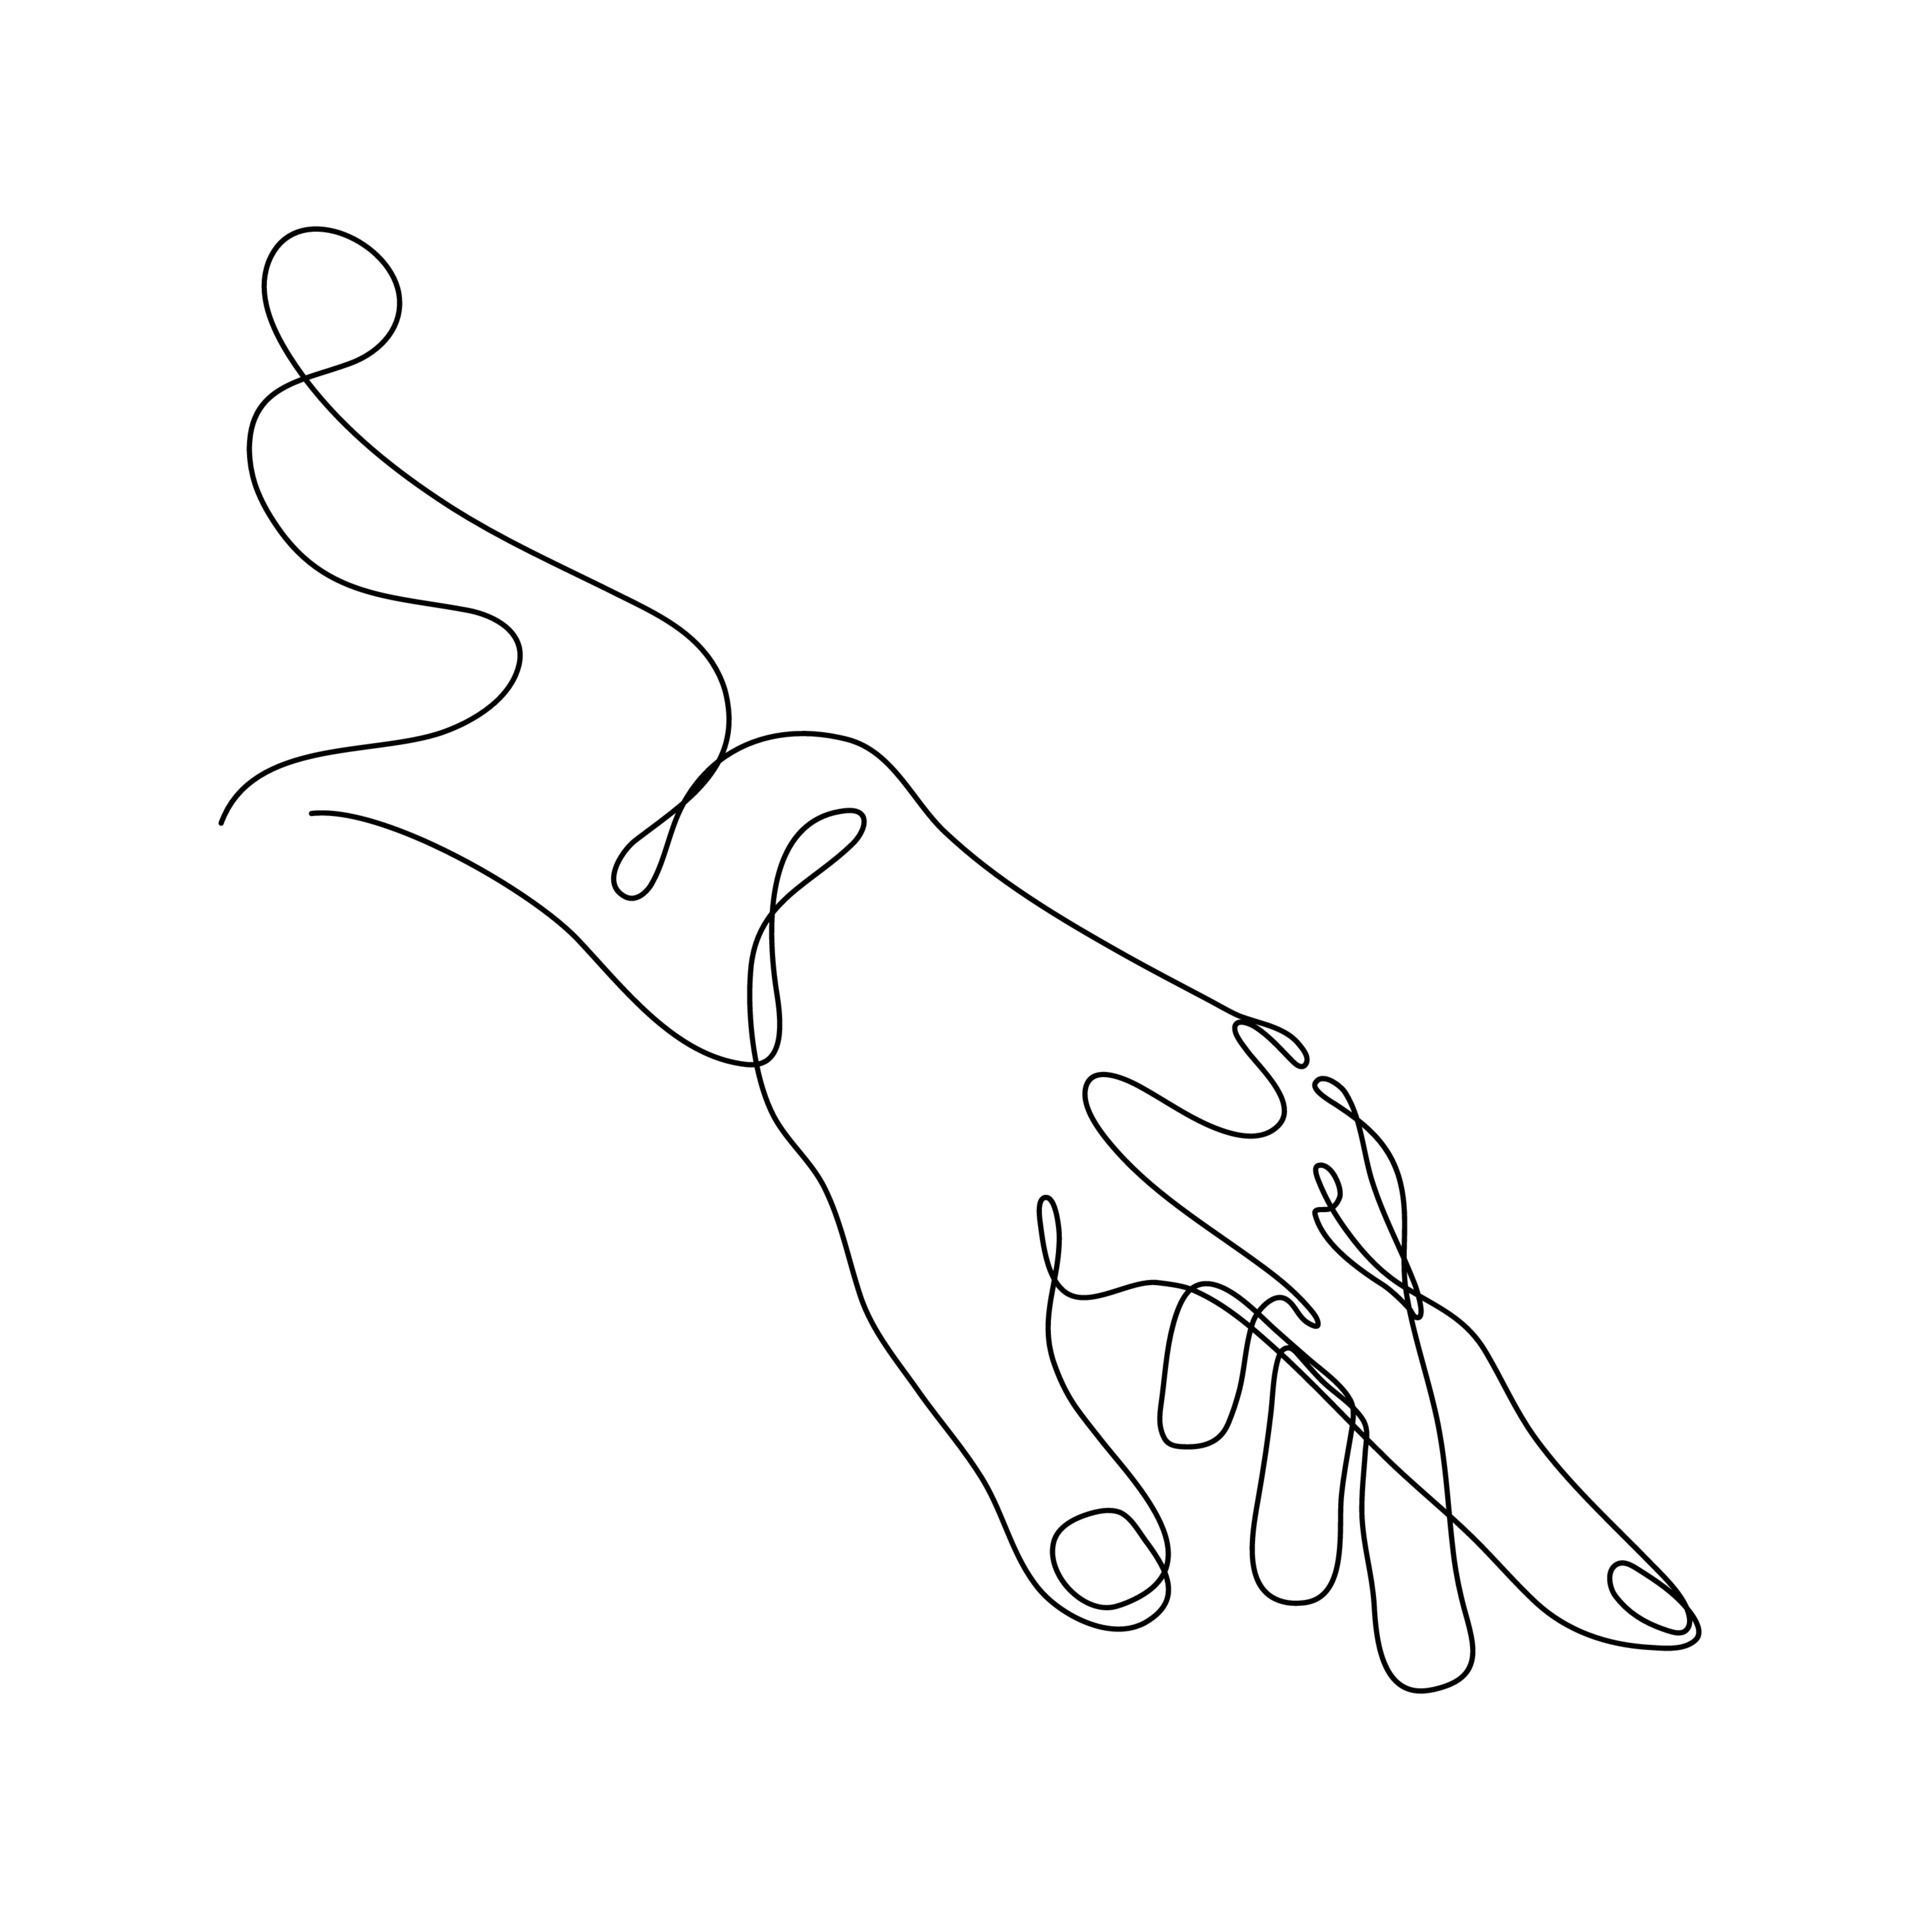 Abstract Human Hand One line drawing art singulart aesthetic simple Perfect for print, wall decor, phone case, shirt, sticker, pillow, acrylic, border, wallpaper, wedding